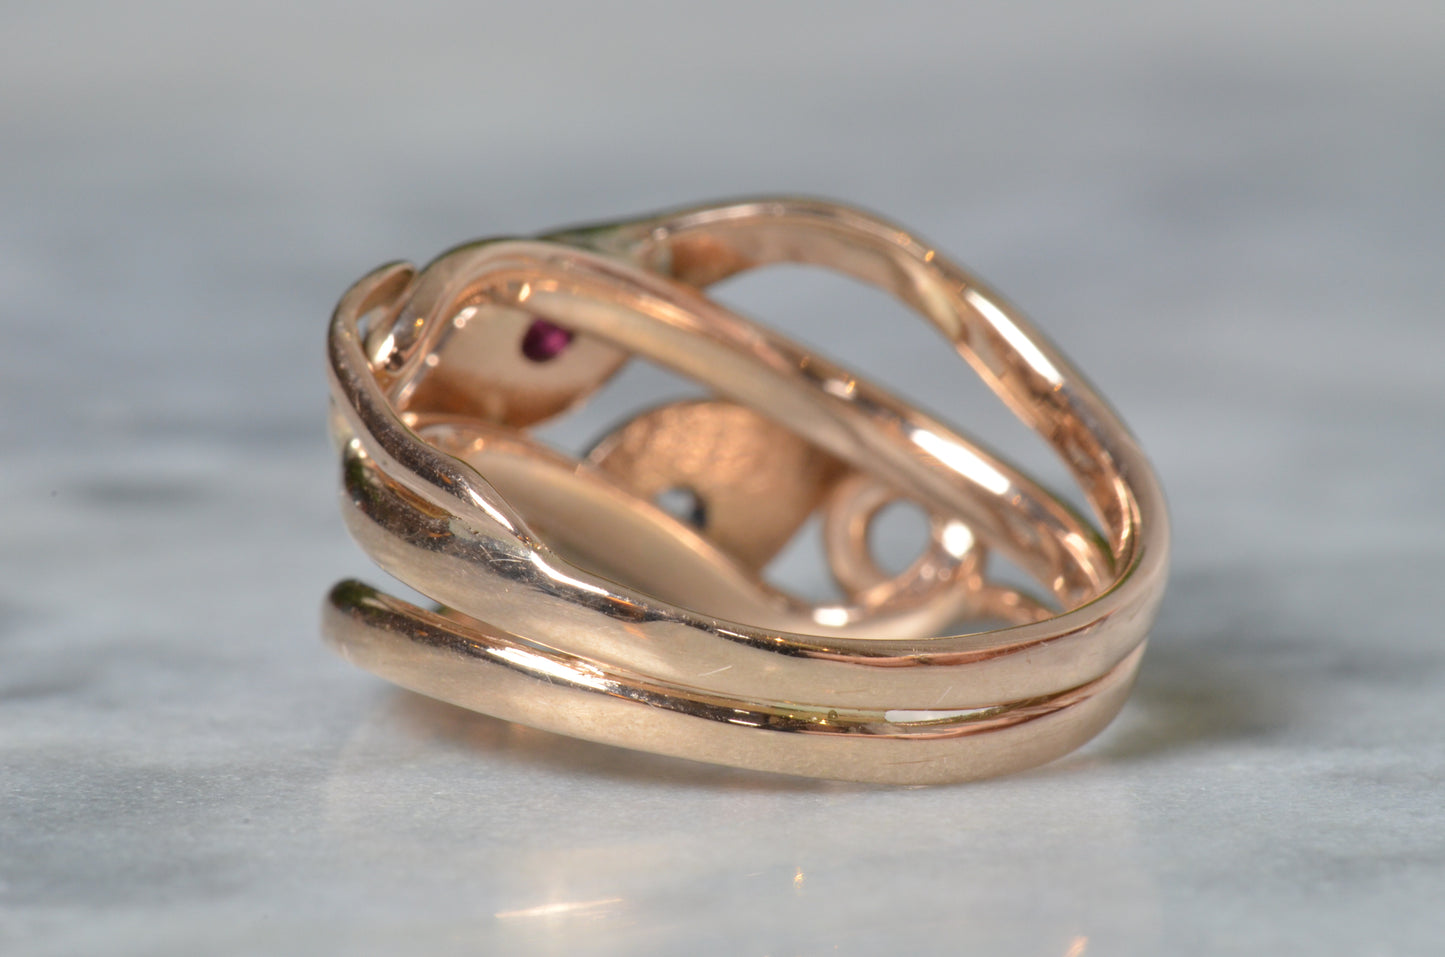 Lively Diamond and Ruby Snake Ring